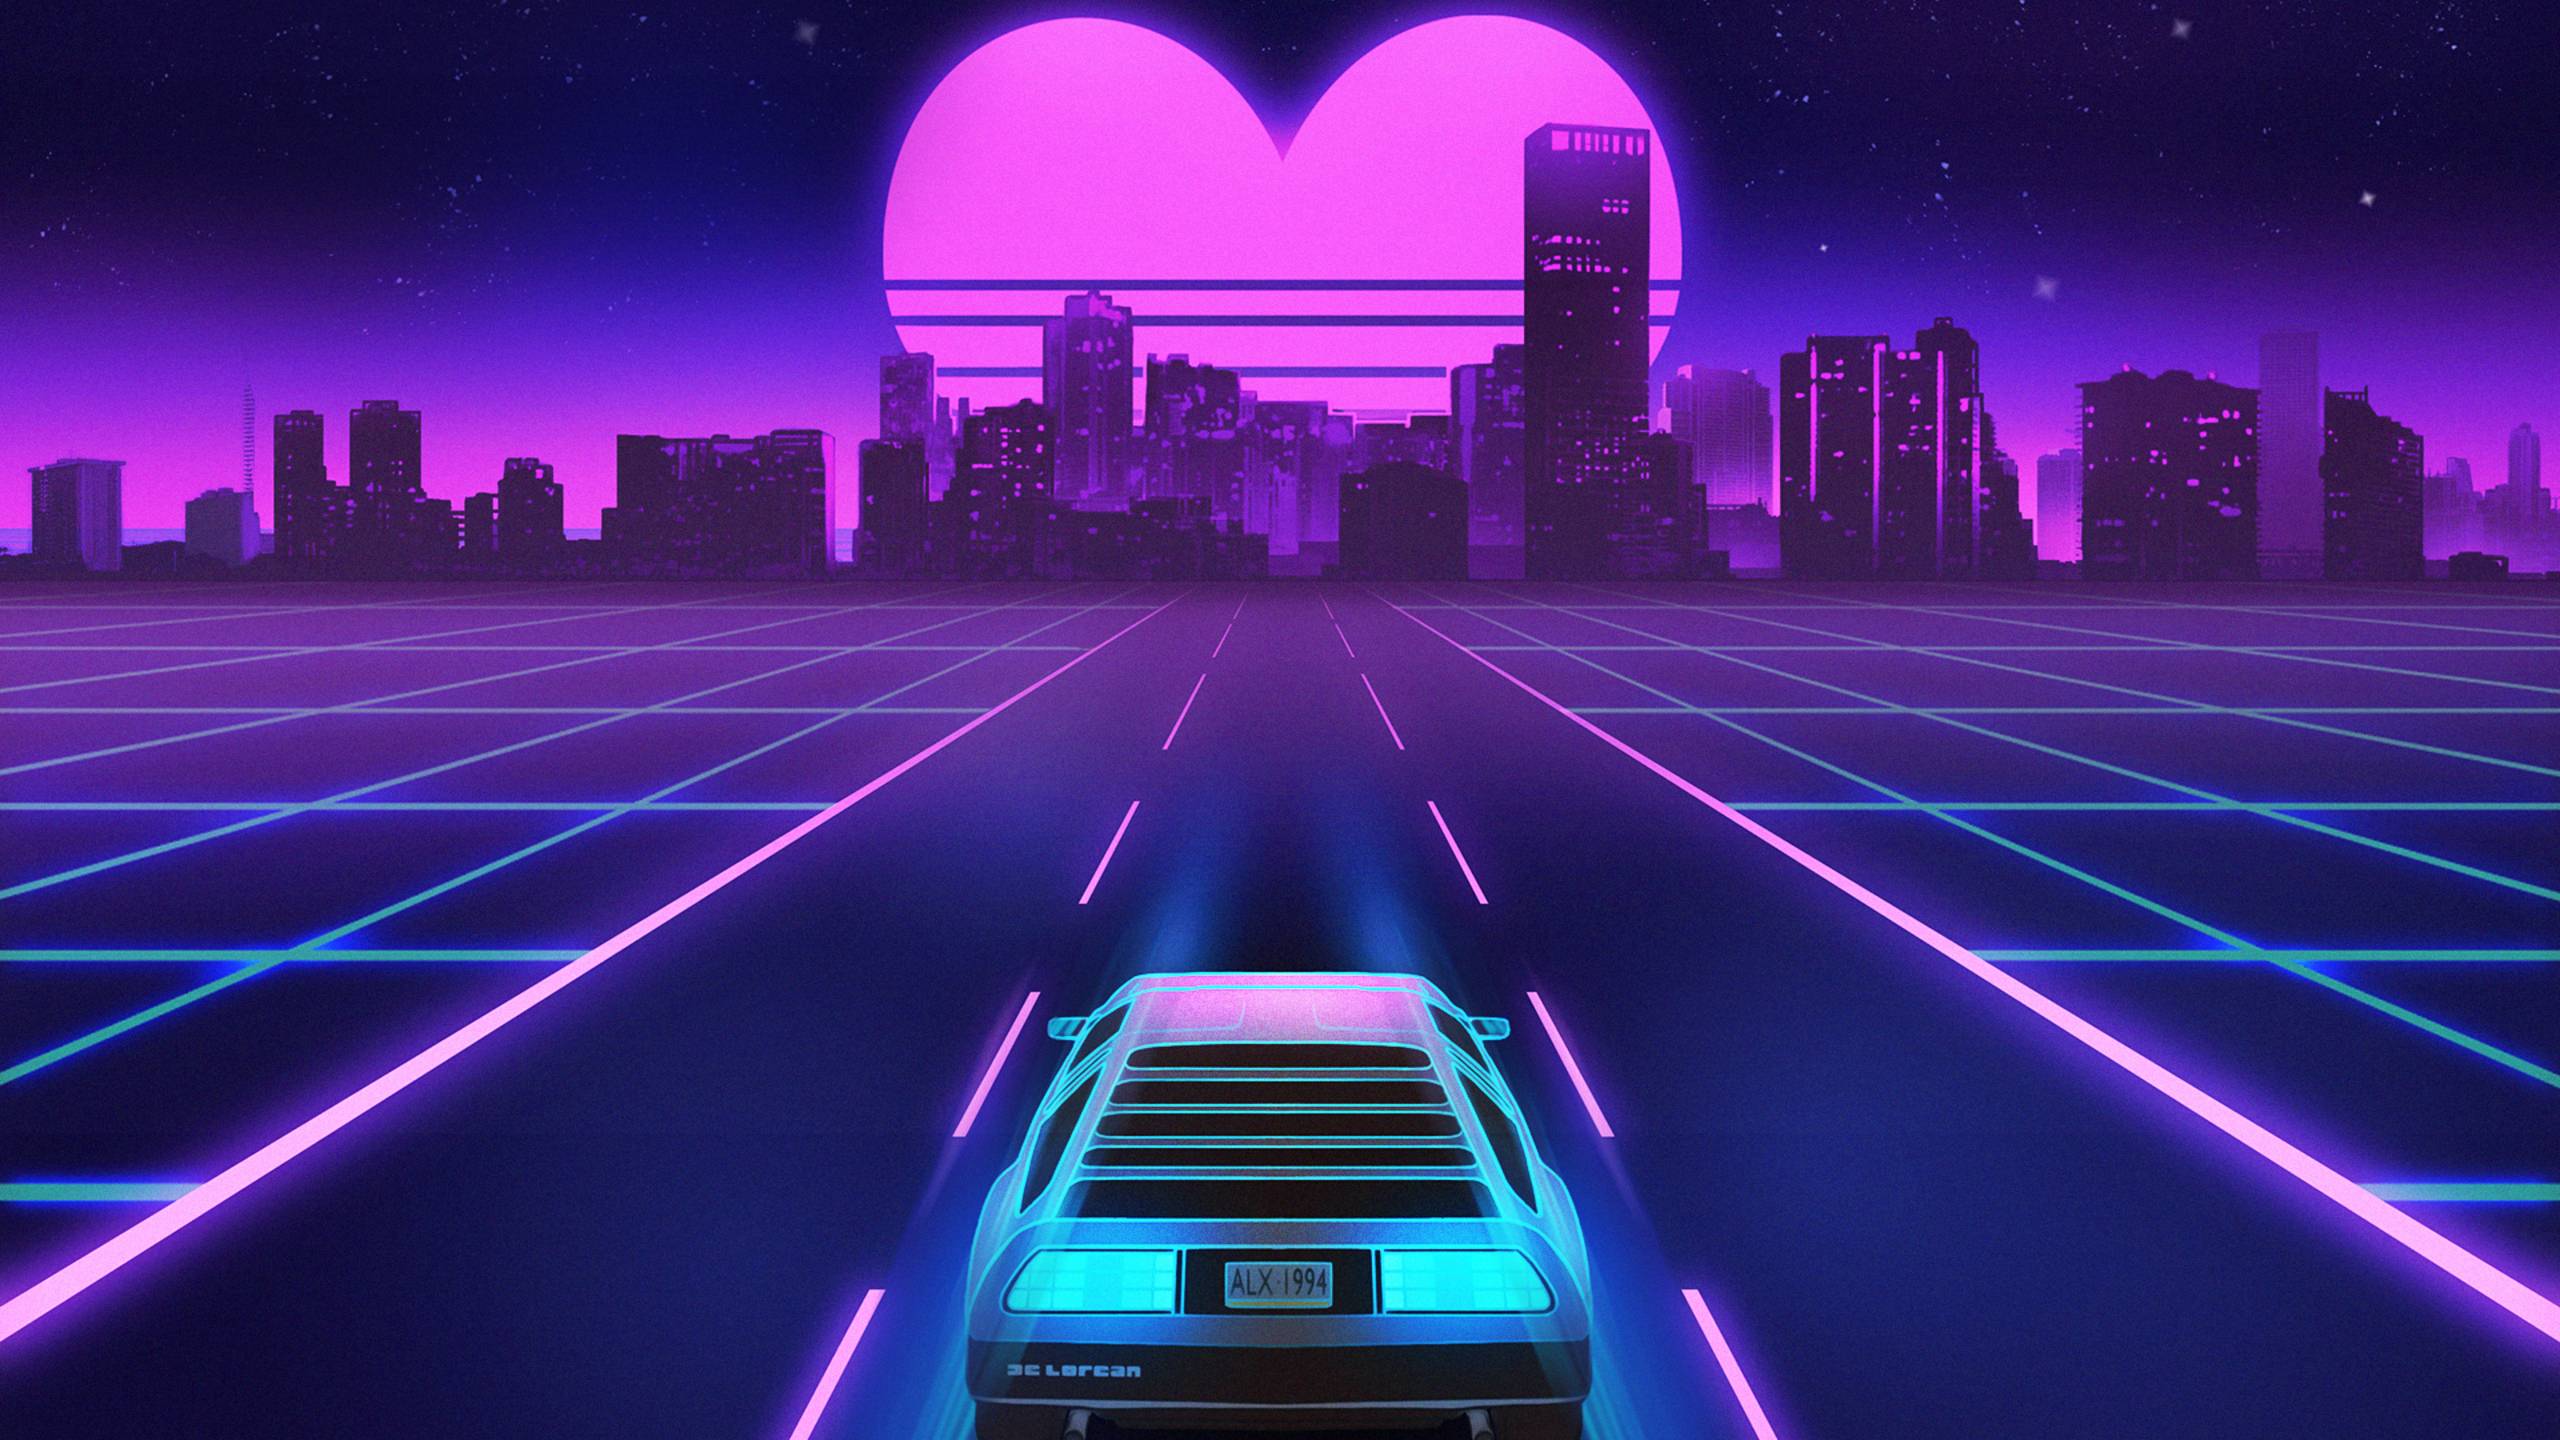 1980s Delorean Vaporwave Heart Shape Sunset 1440P Resolution HD 4k Wallpaper, Image, Background, Photo and Picture